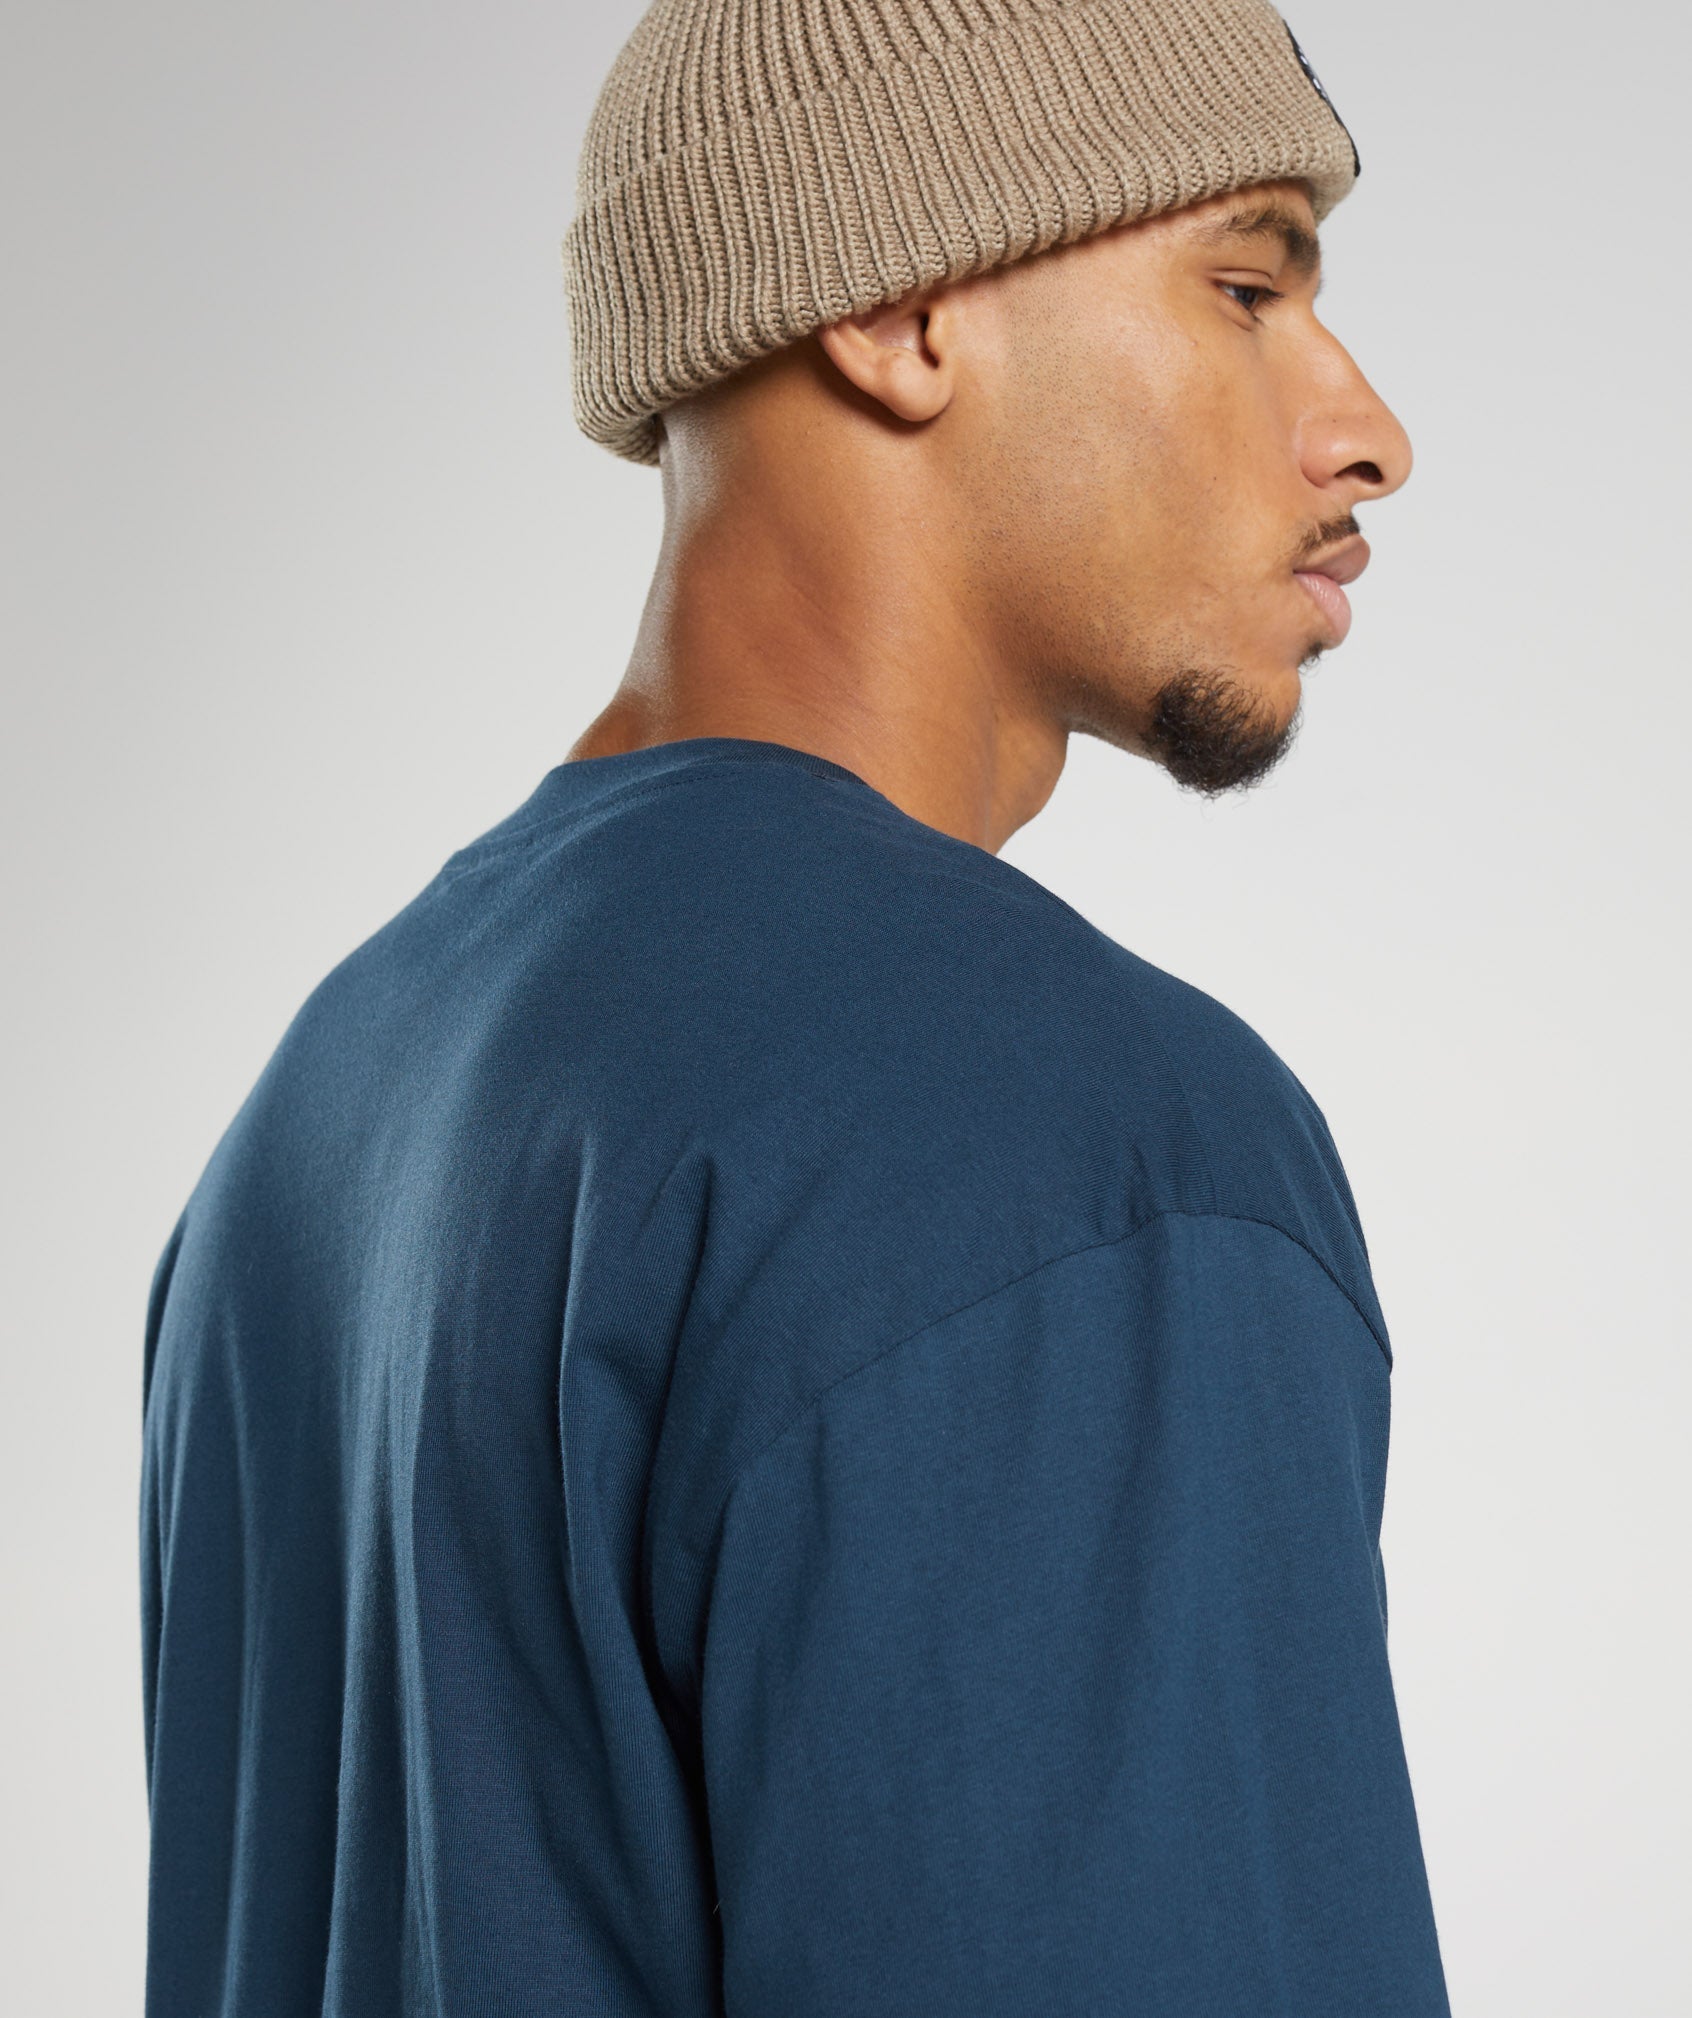 Rest Day Sweats Long Sleeve T-Shirt in Navy - view 7